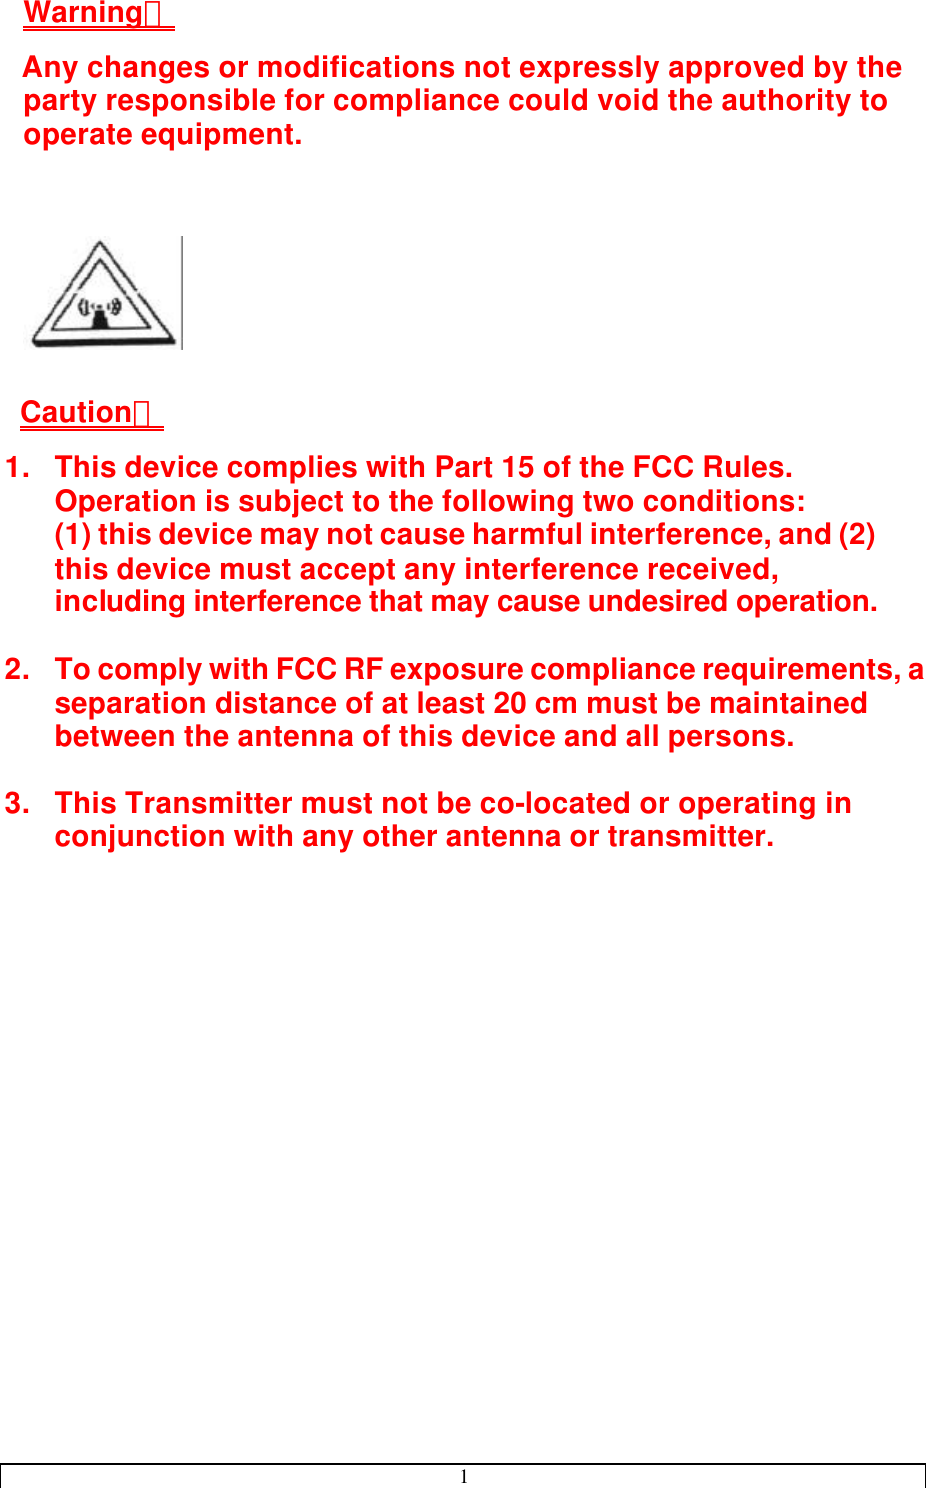 1  Warning： Any changes or modifications not expressly approved by the party responsible for compliance could void the authority to operate equipment.       Caution： 1. This device complies with Part 15 of the FCC Rules. Operation is subject to the following two conditions:  (1) this device may not cause harmful interference, and (2) this device must accept any interference received, including interference that may cause undesired operation.  2. To comply with FCC RF exposure compliance requirements, a separation distance of at least 20 cm must be maintained between the antenna of this device and all persons.  3. This Transmitter must not be co-located or operating in conjunction with any other antenna or transmitter.   